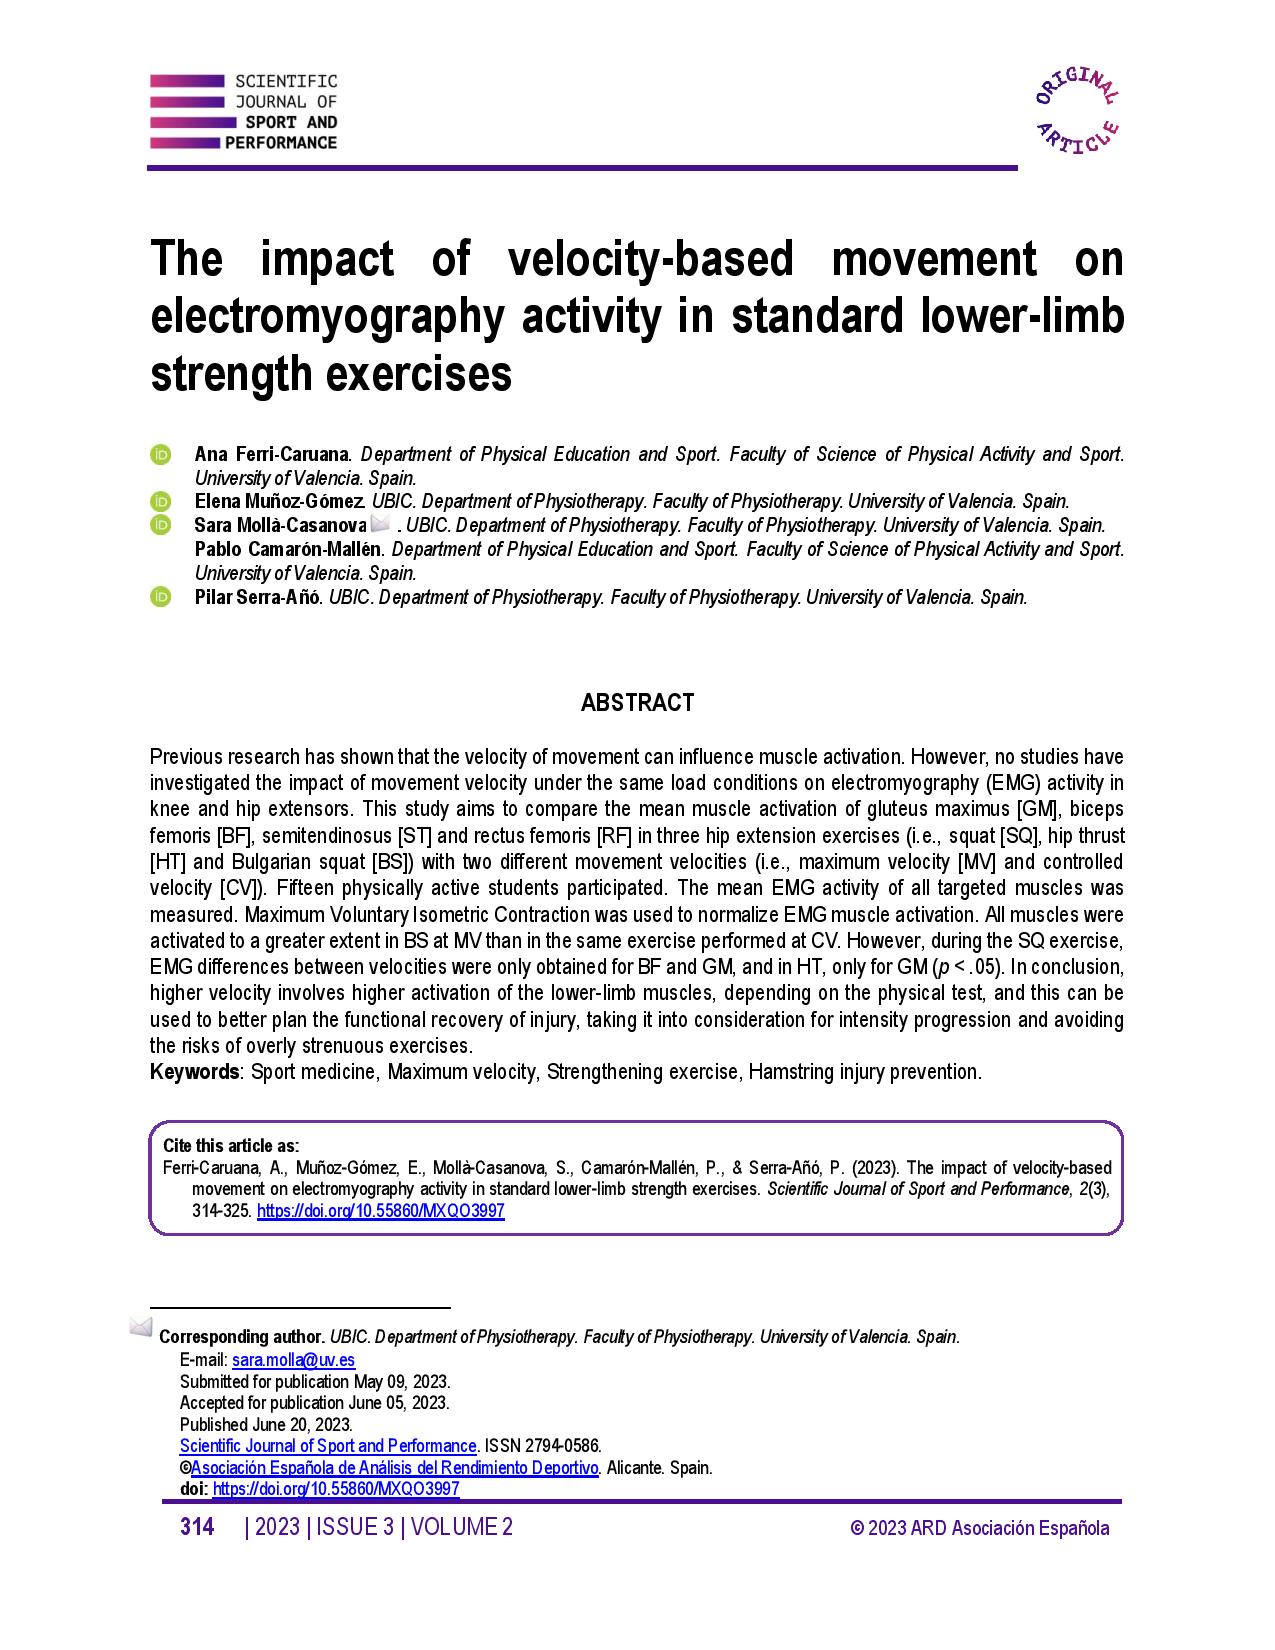 The impact of velocity-based movement on electromyography activity in standard lower-limb strength exercises